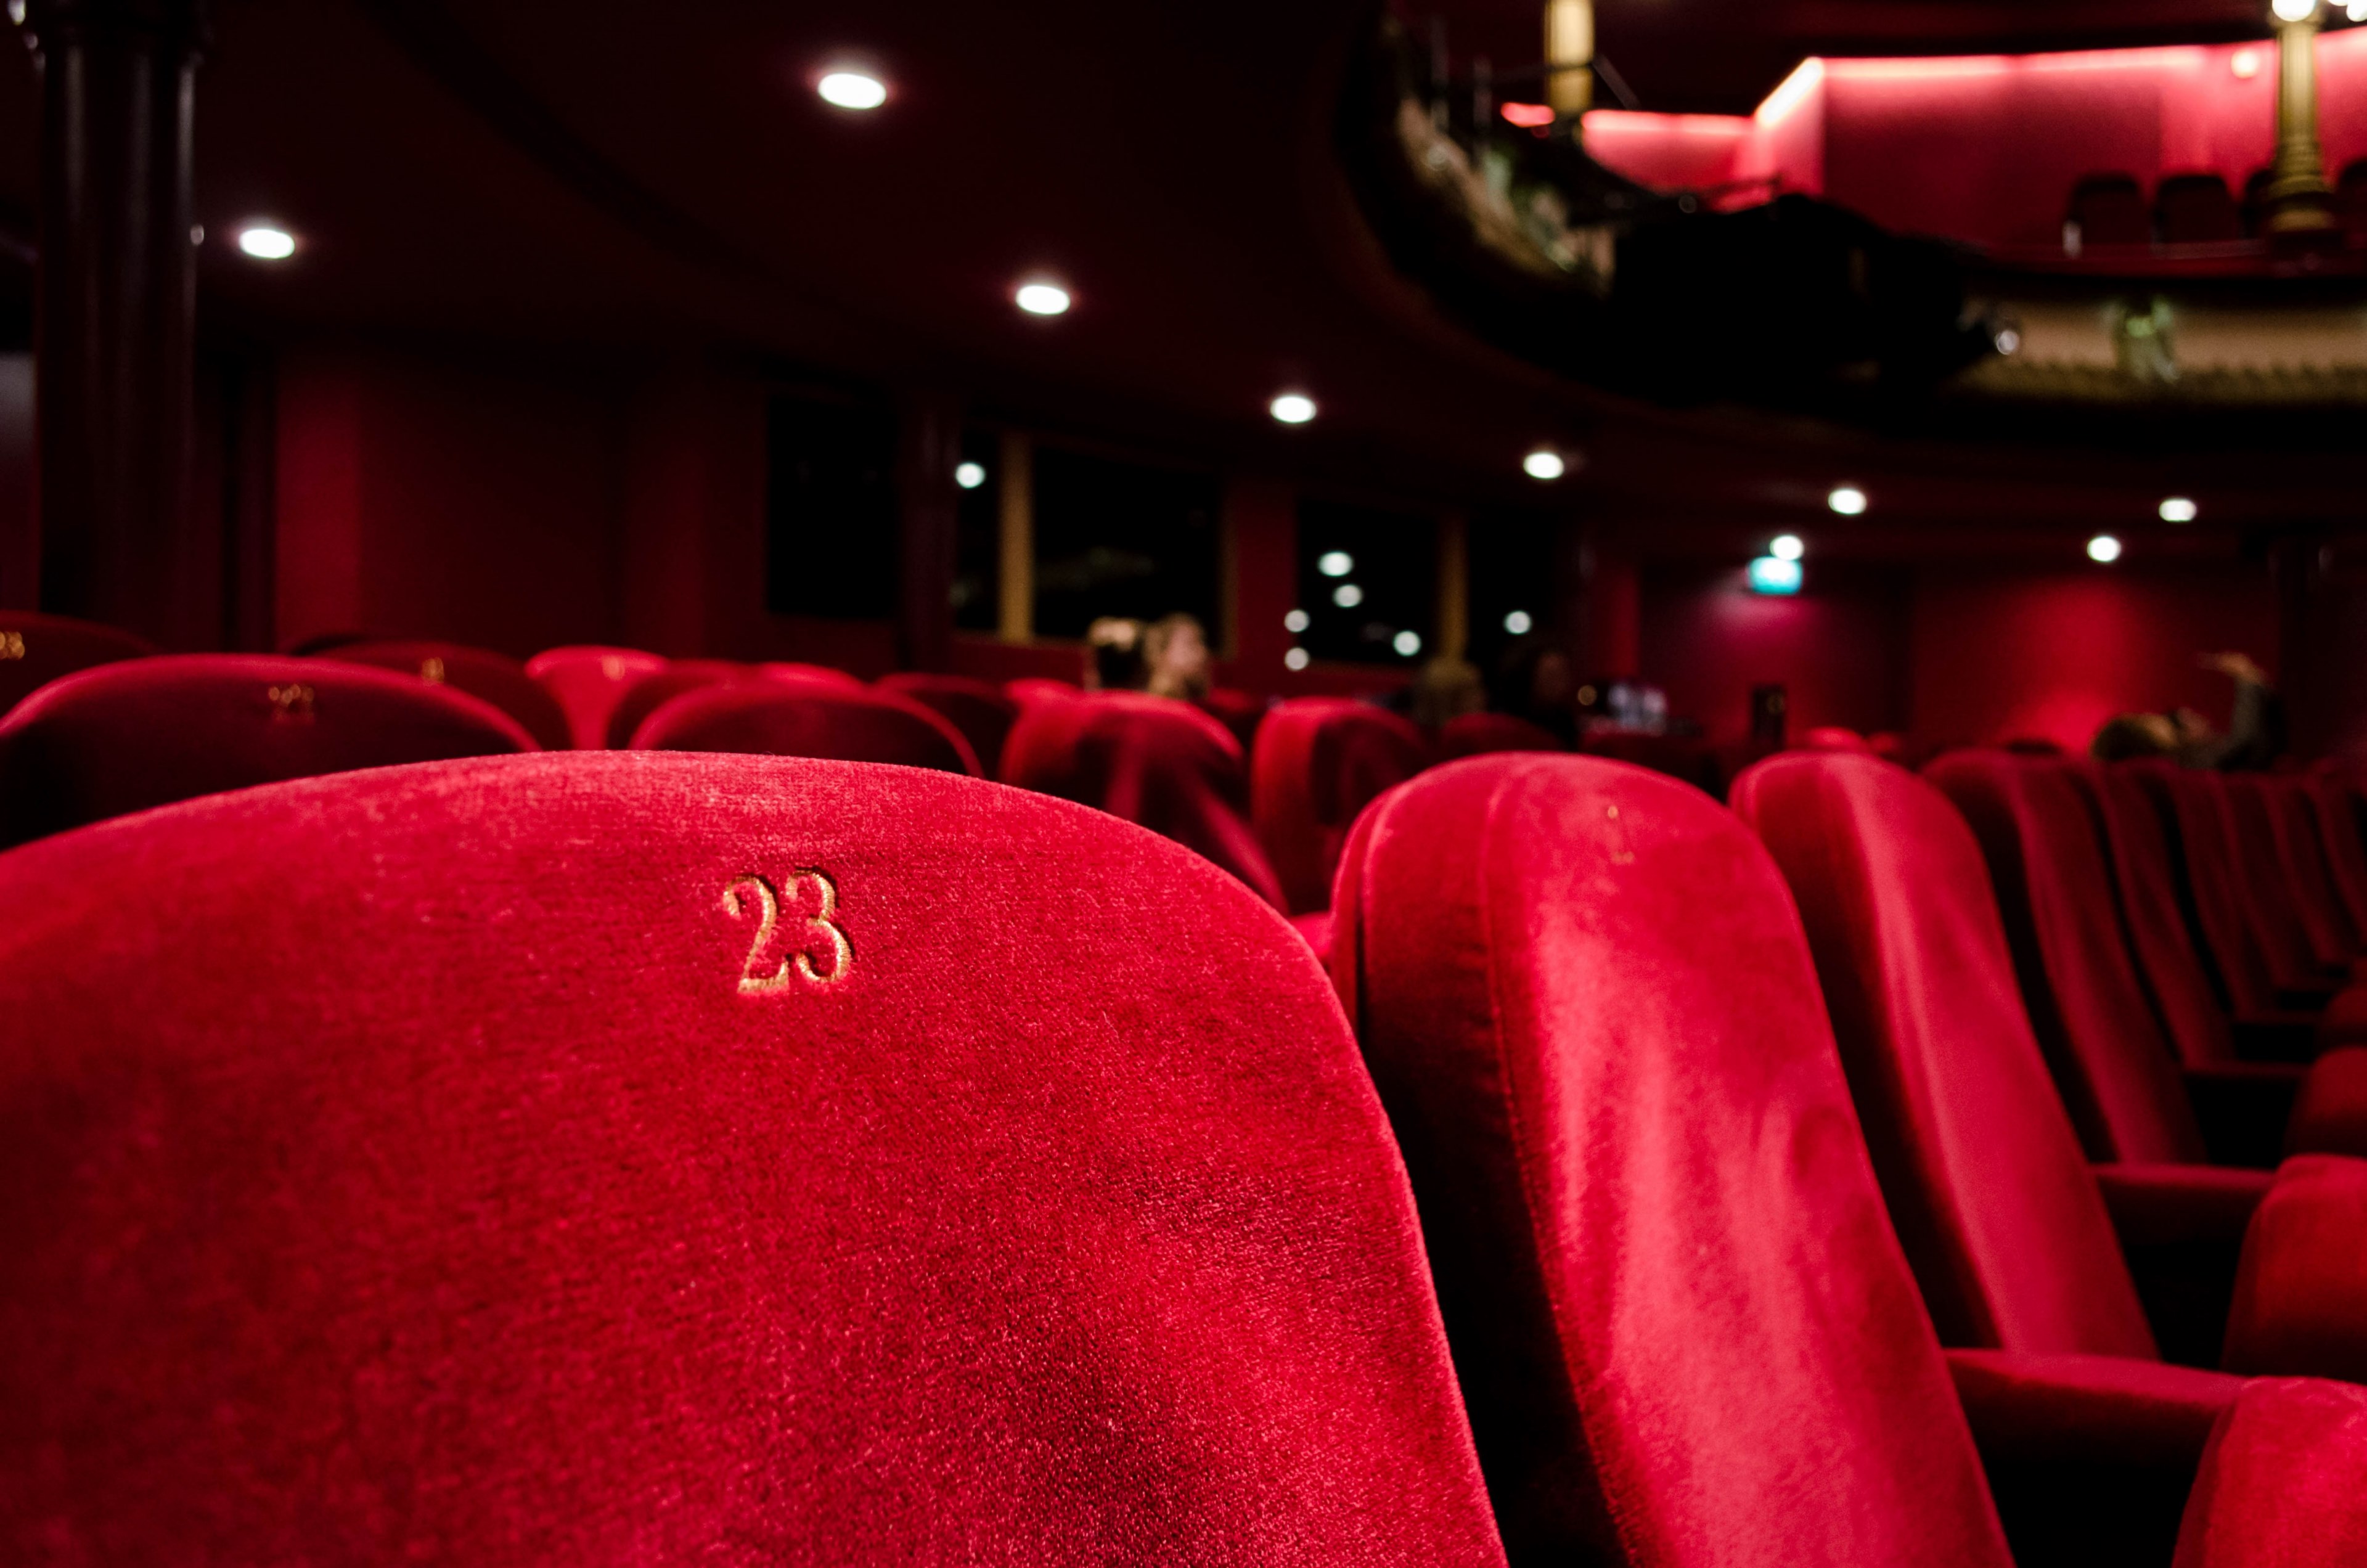 Wallpaper / cinema theater theatre and seat HD 4k wallpaper free download